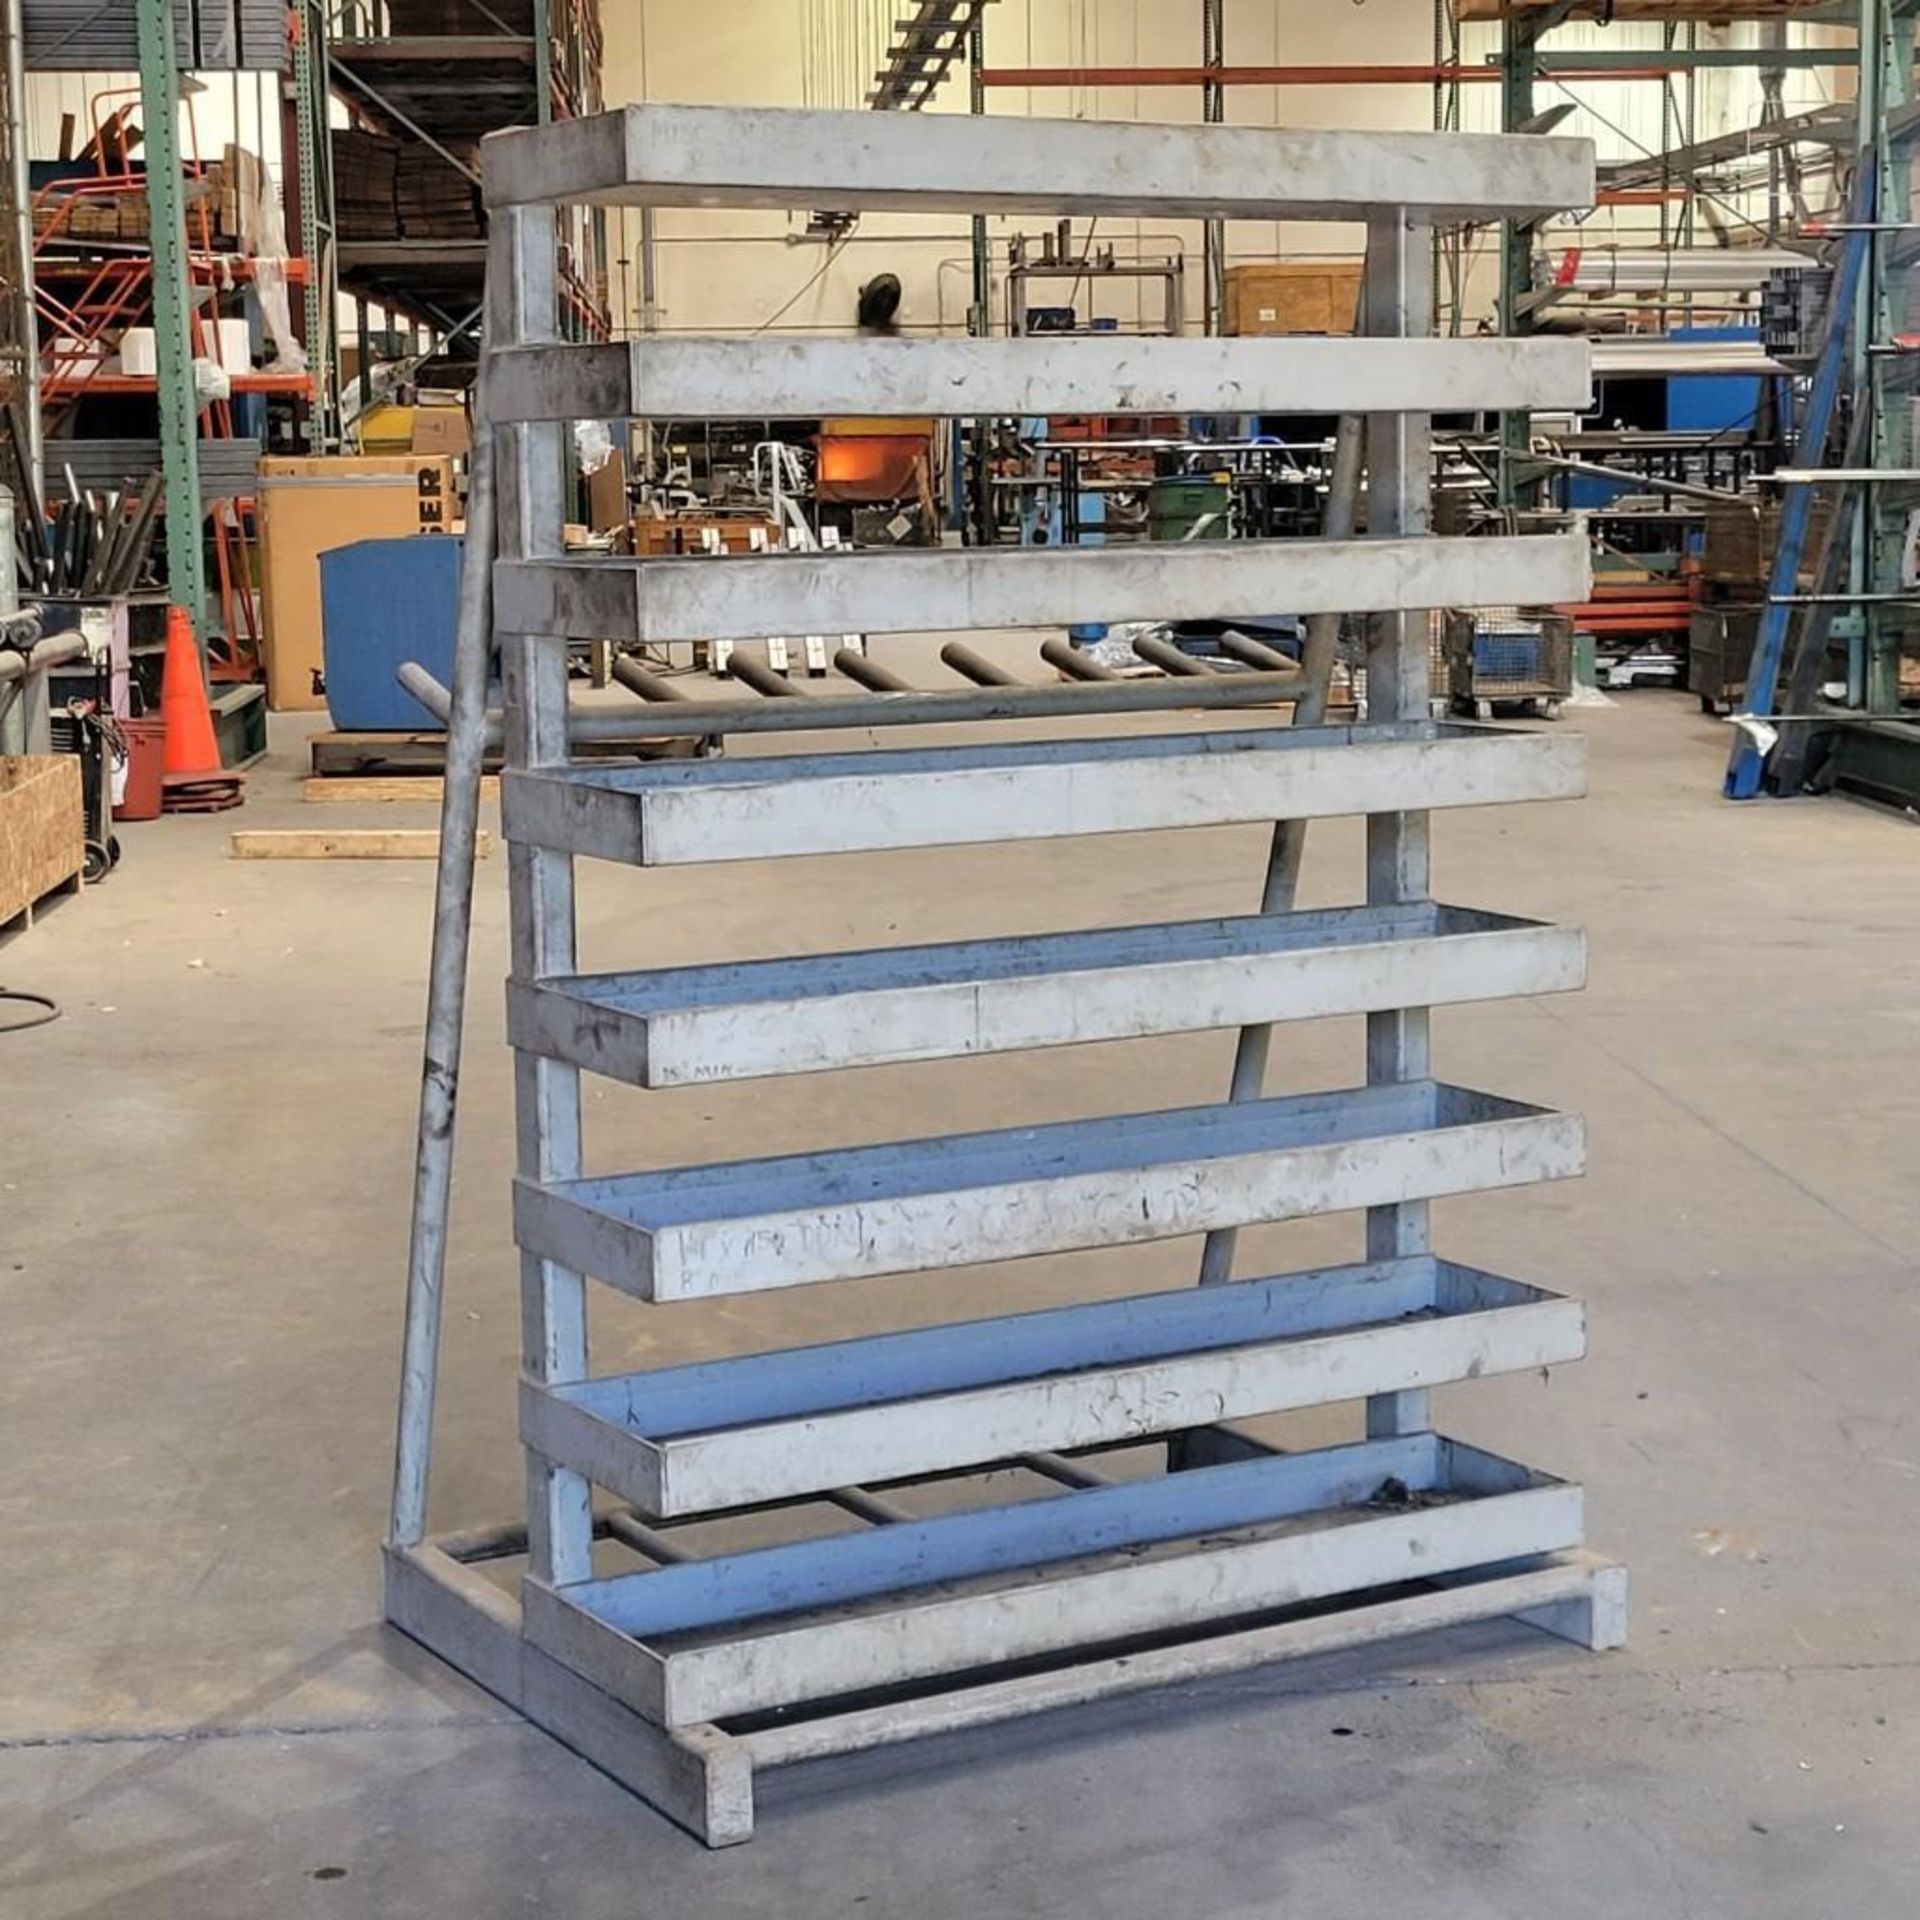 8 Tray Remnant Rack with Tube Storage